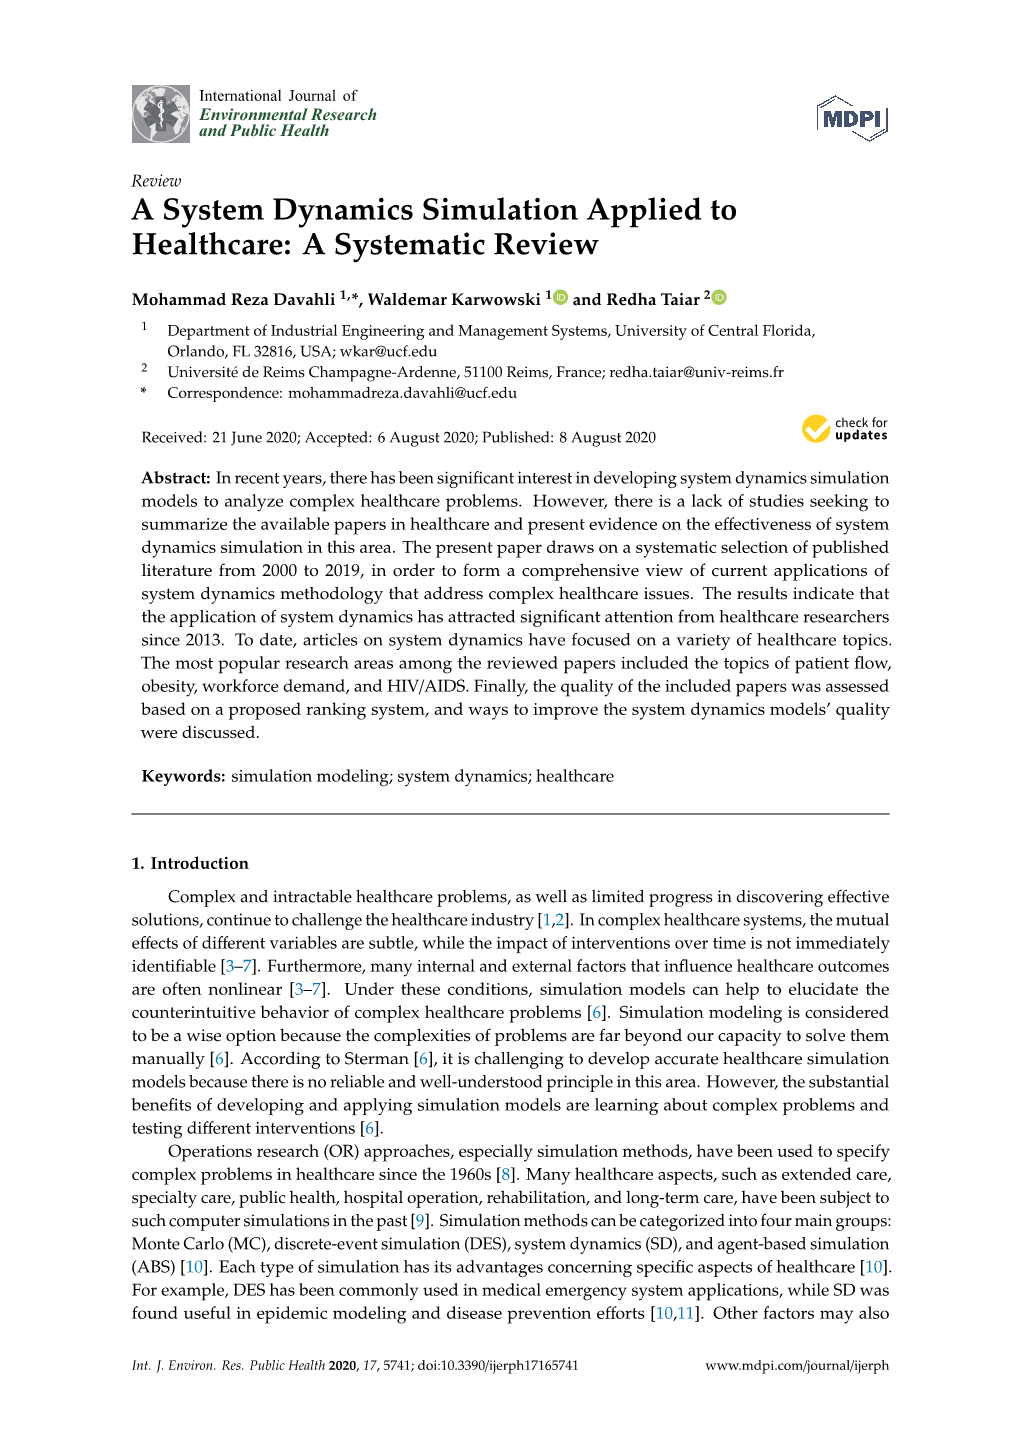 A System Dynamics Simulation Applied to Healthcare: a Systematic Review